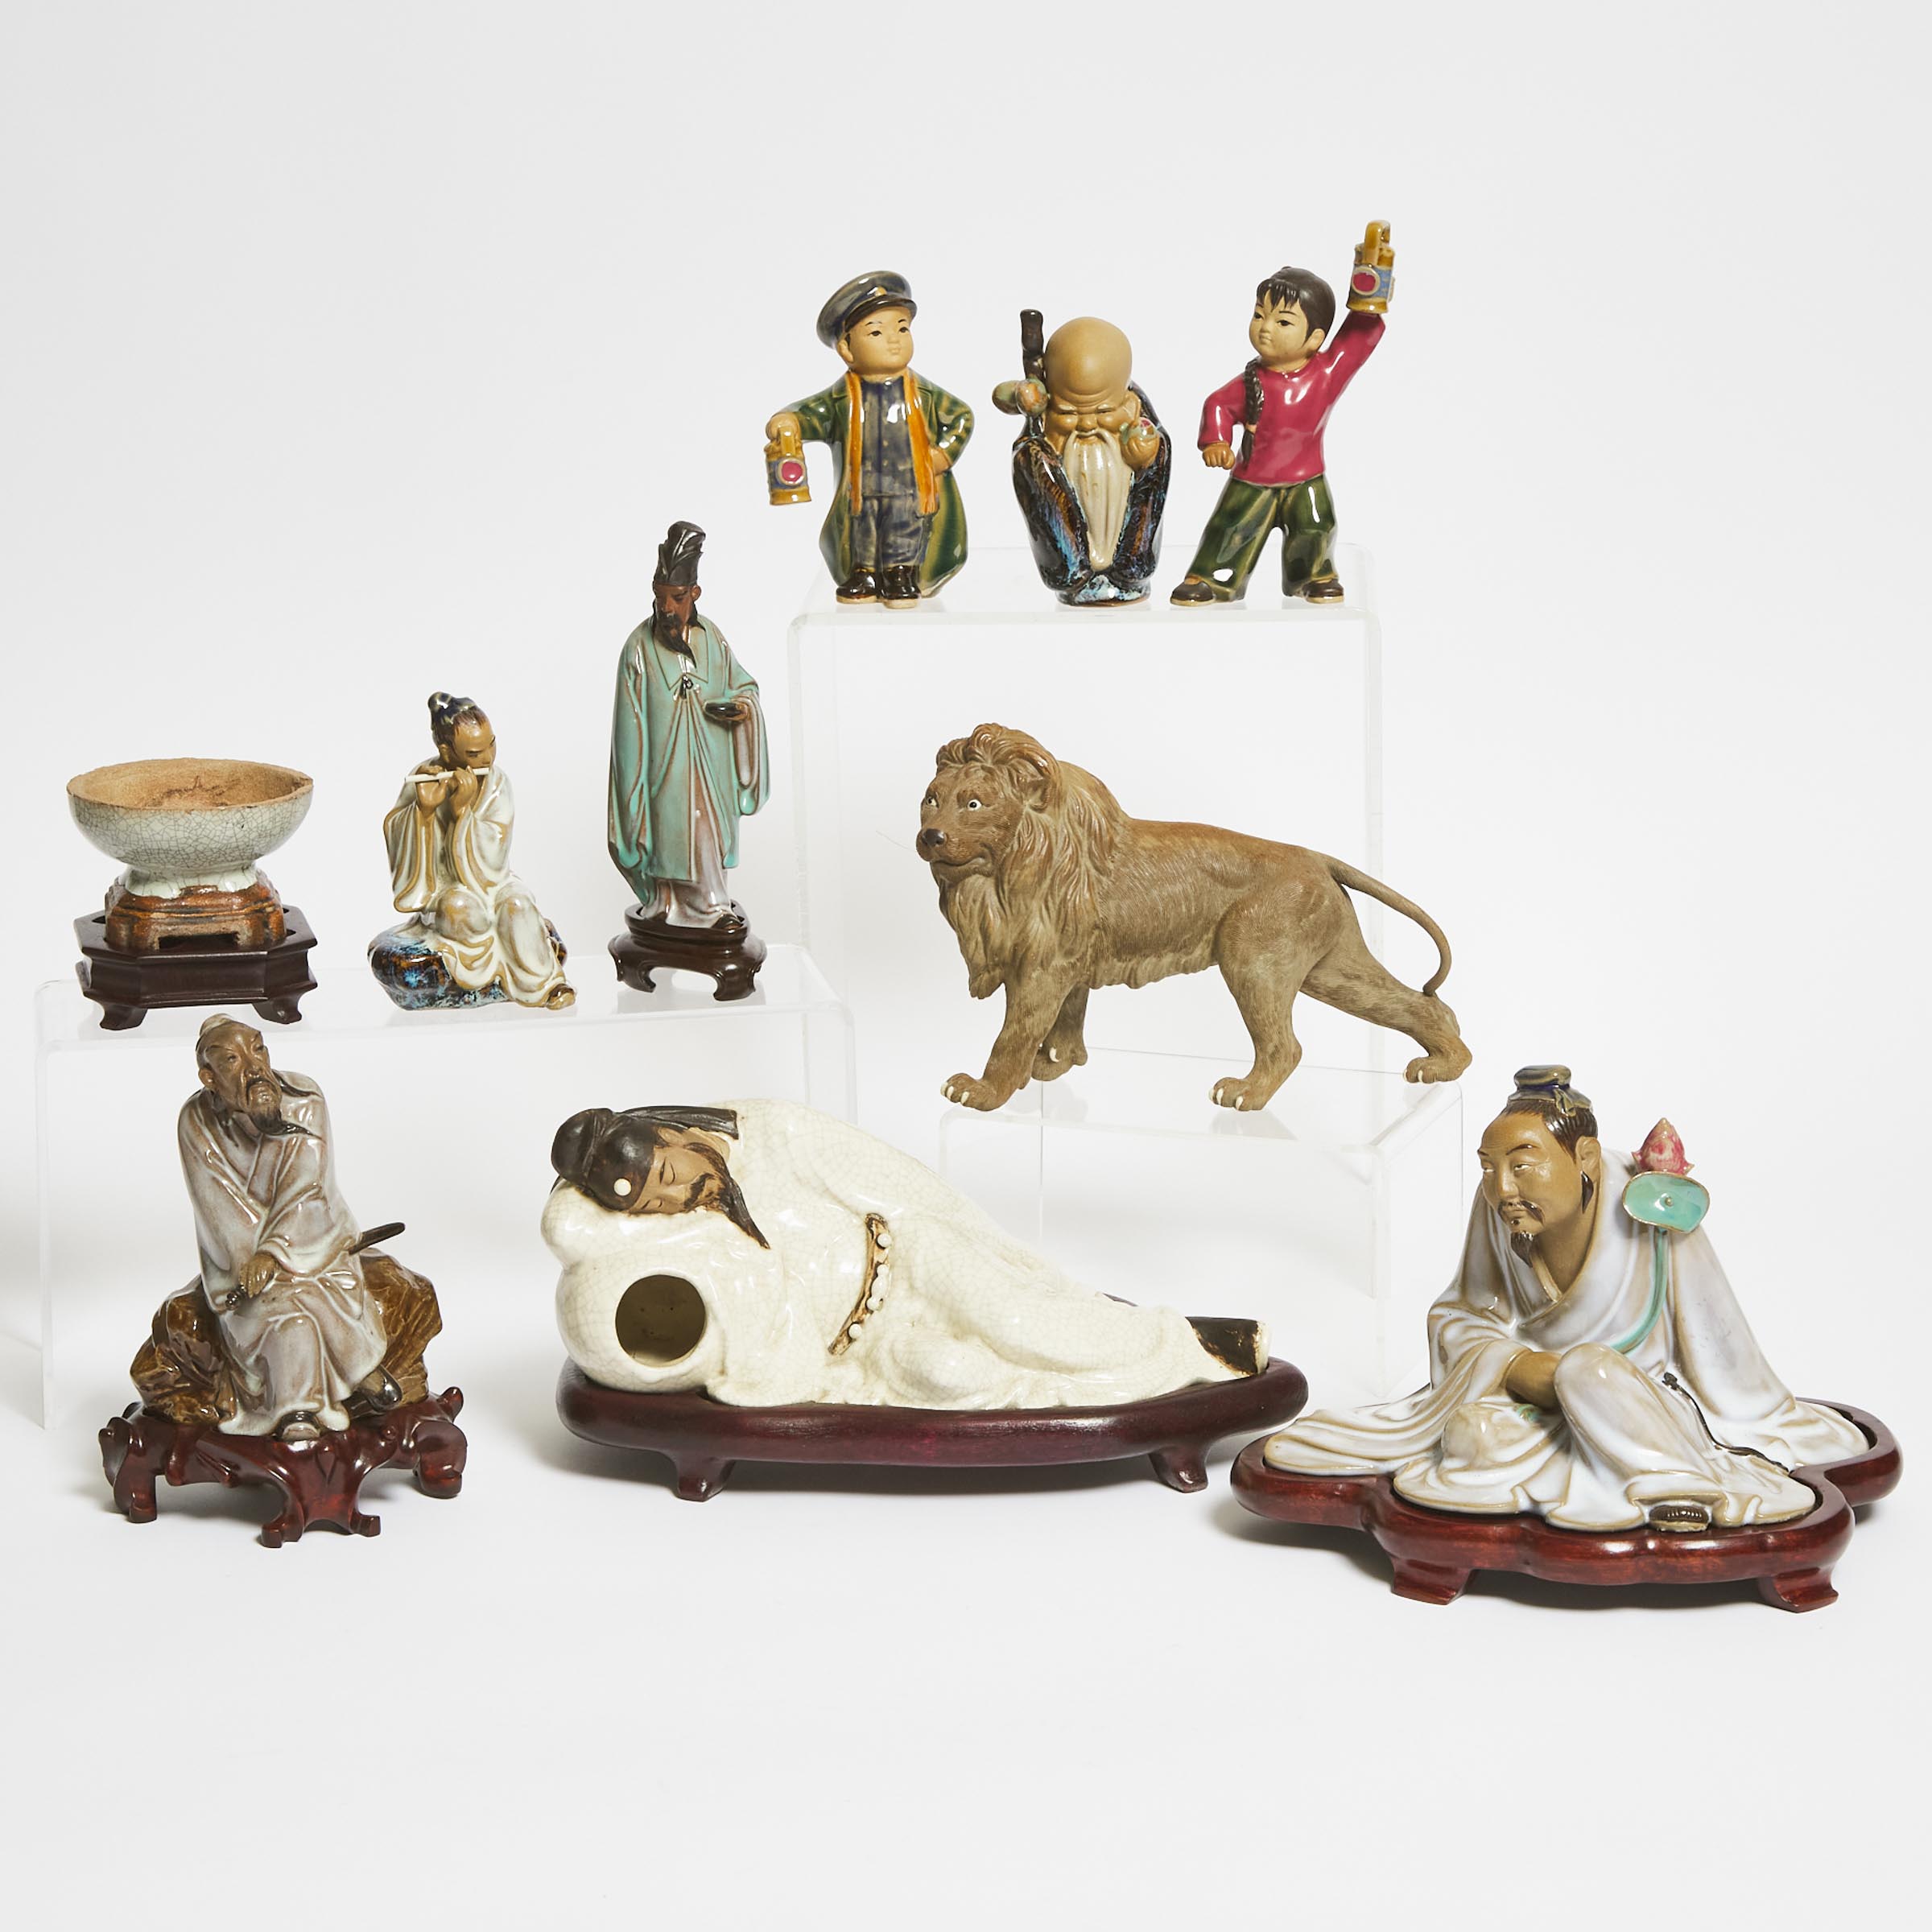 A Group of Ten Shiwan Pottery Figures and Wares, 20th Century